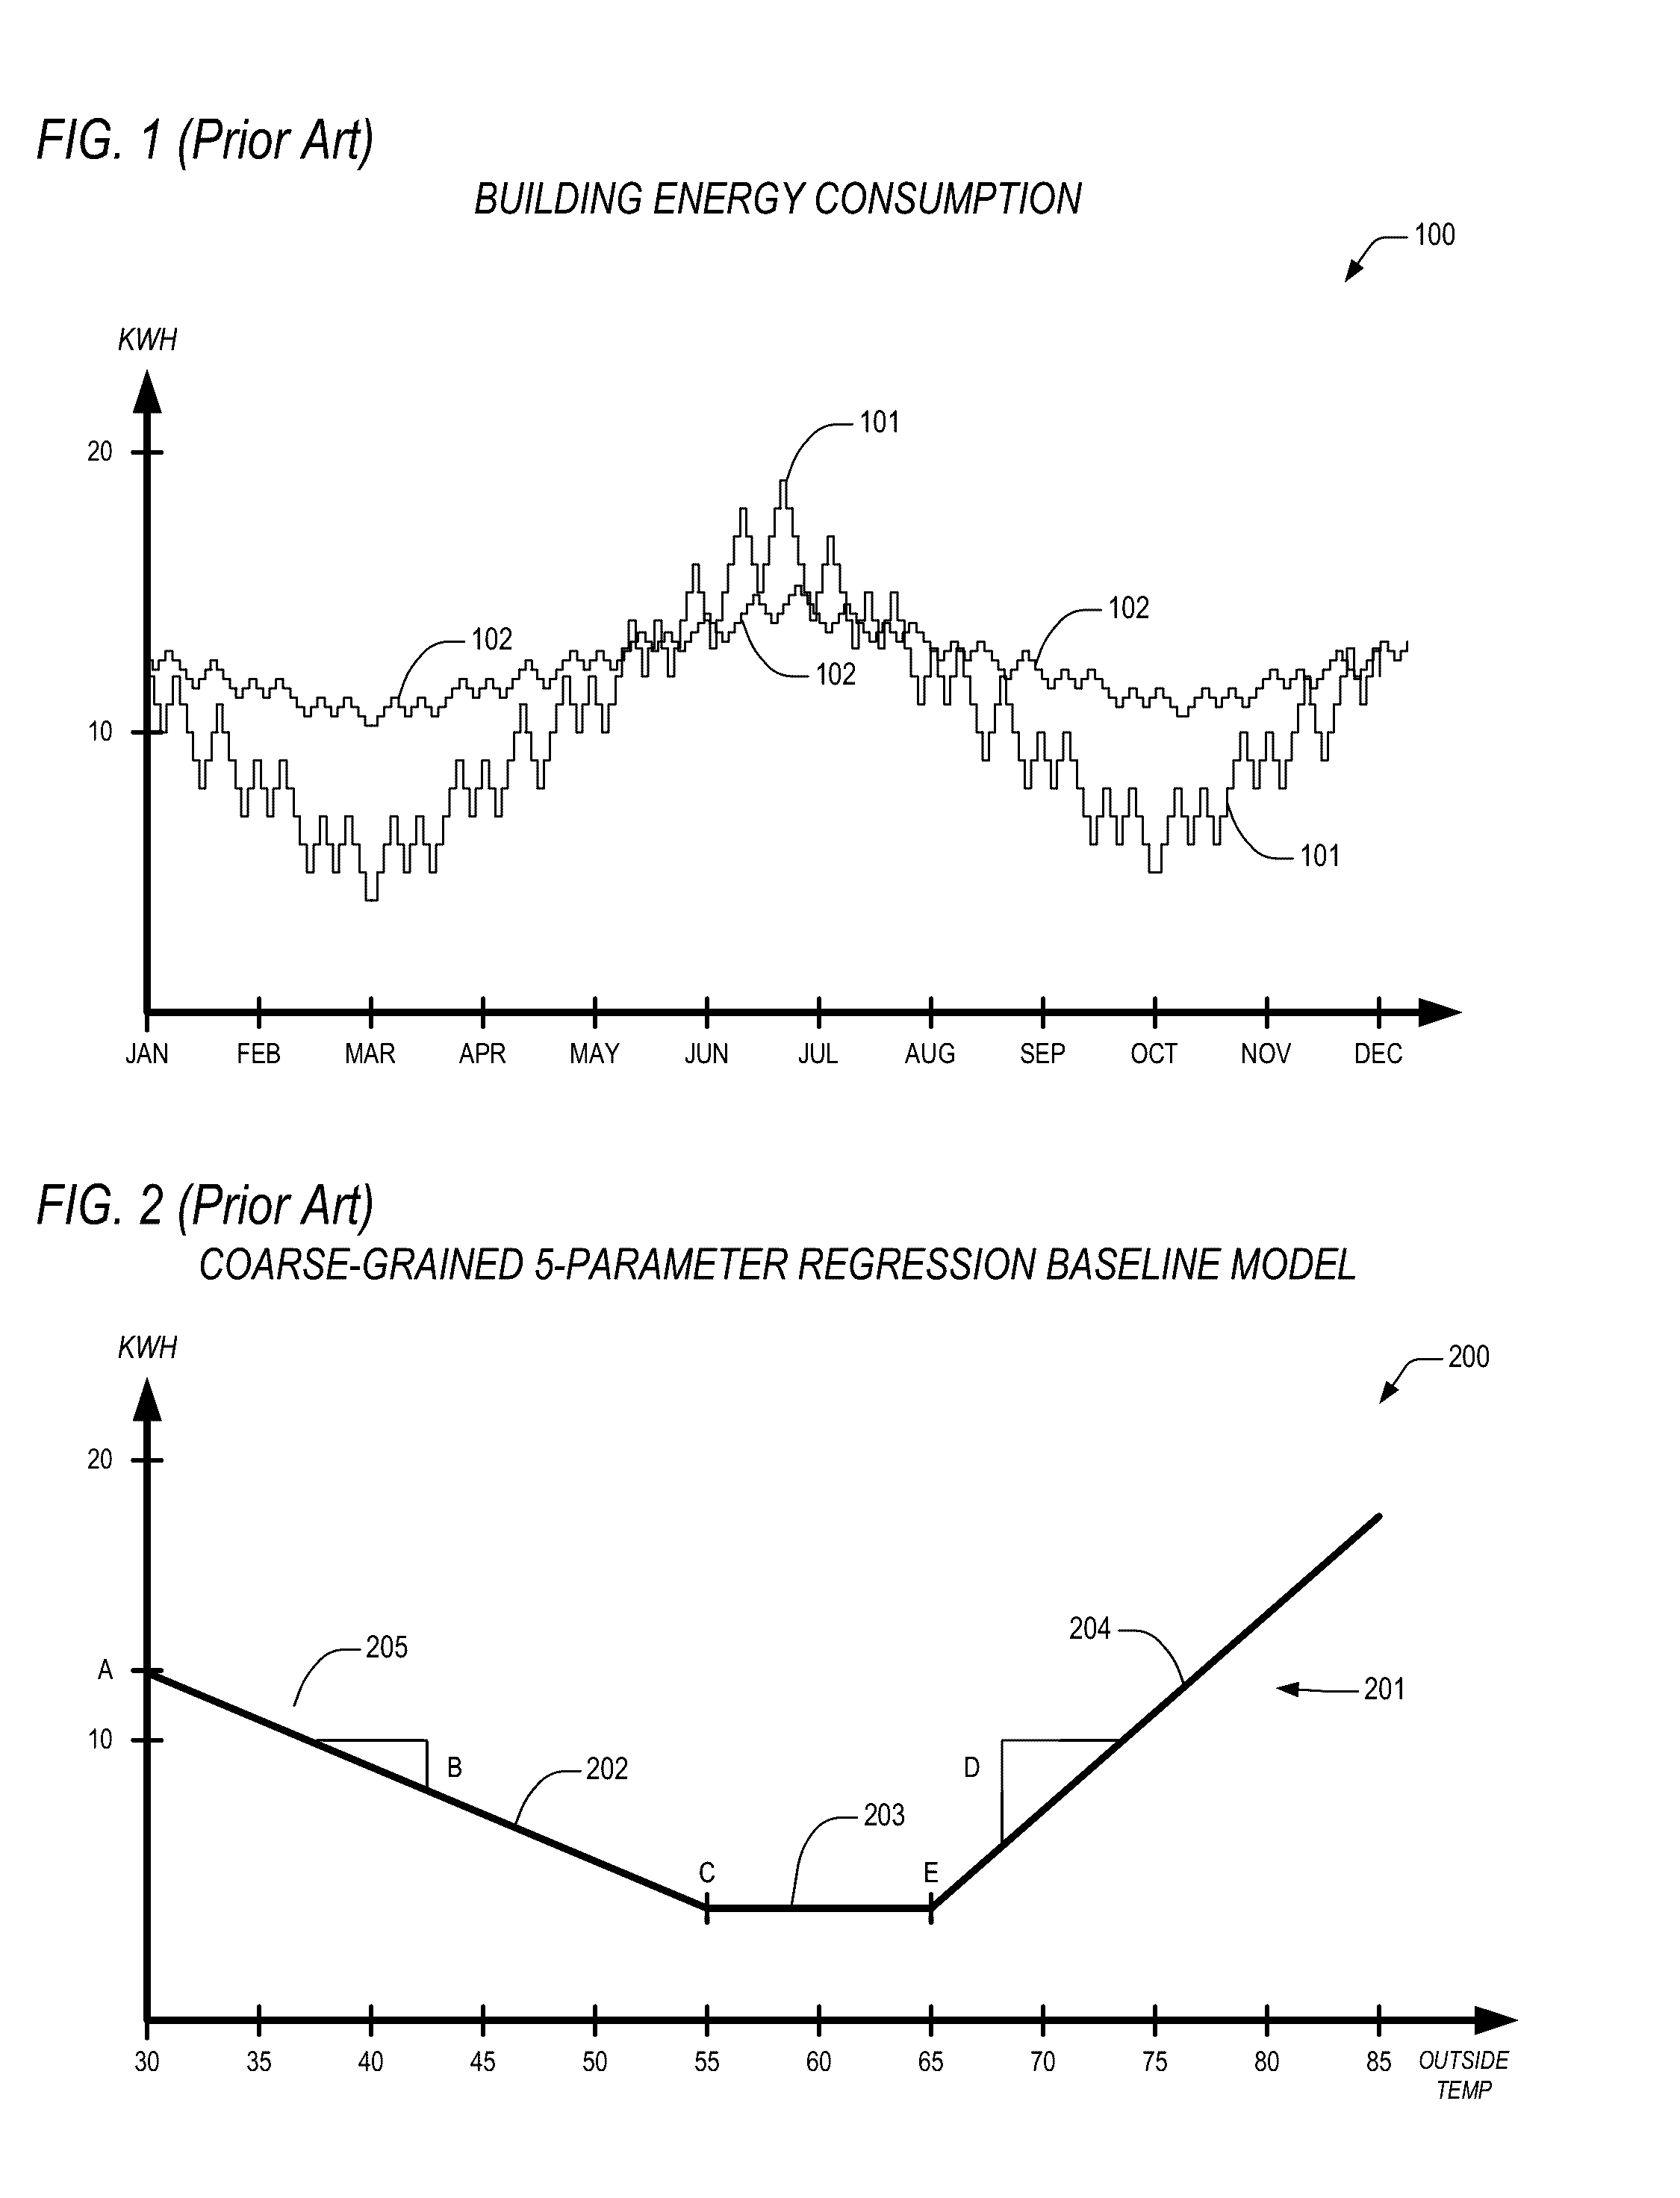 Apparatus and method for fine-grained weather normalization of energy consumption baseline data